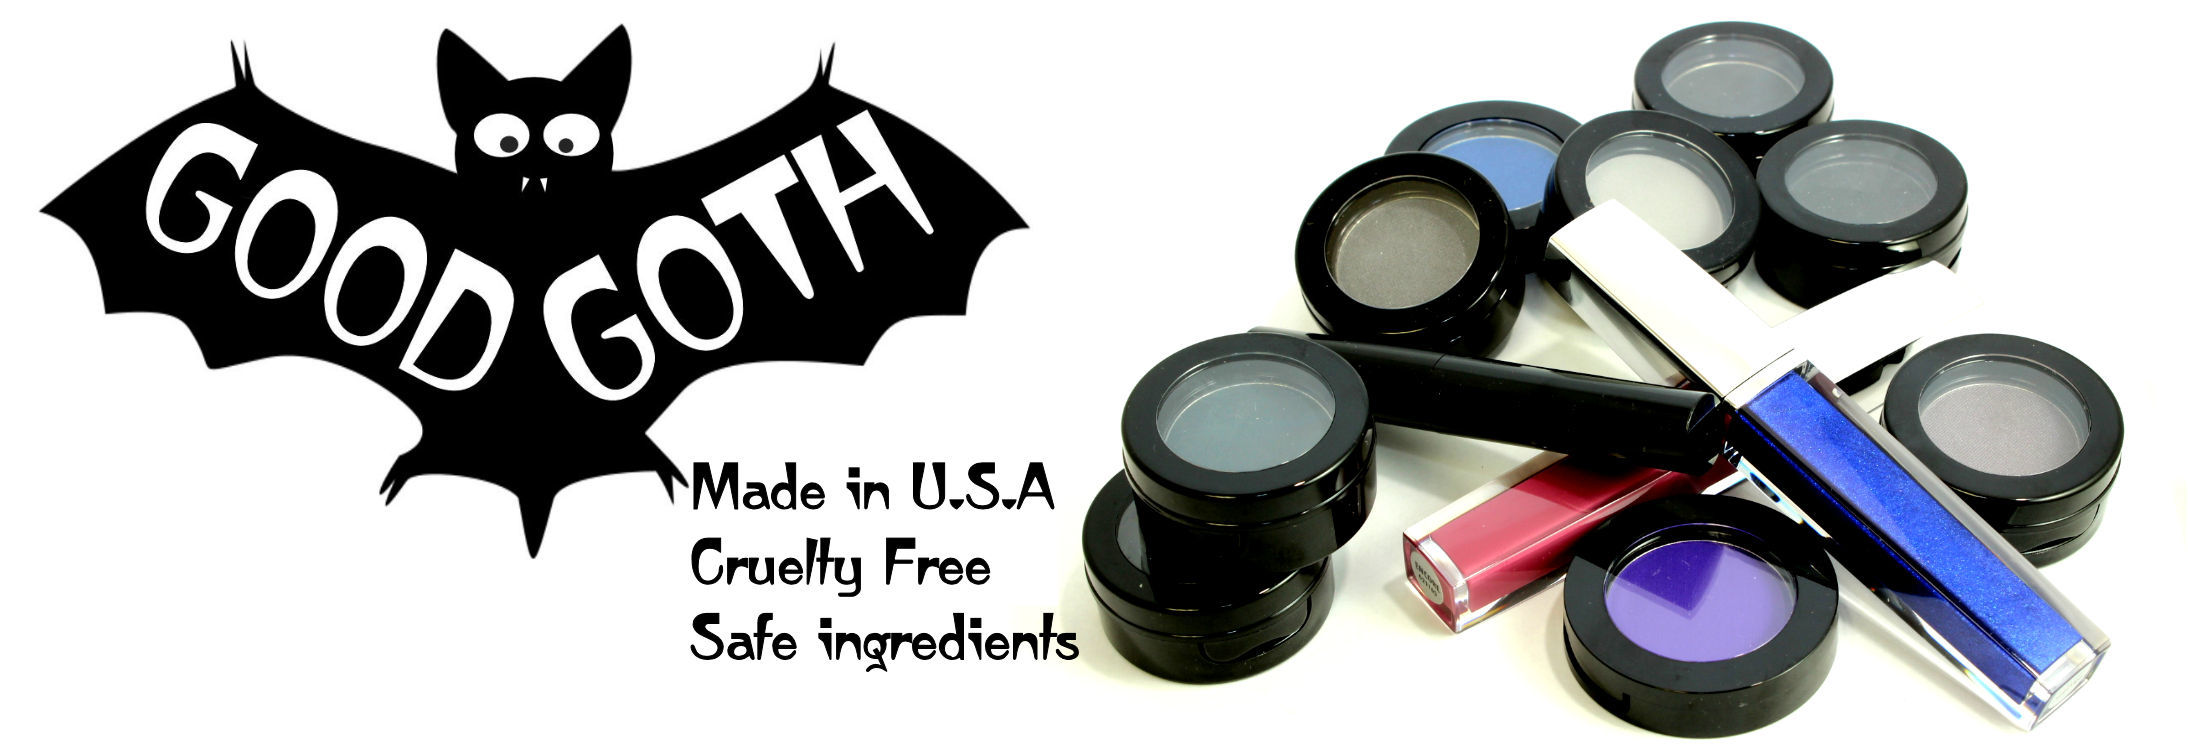 Strange and Unusual Gothic Makeup. Made in America. Cruelty Free. -Good Goth